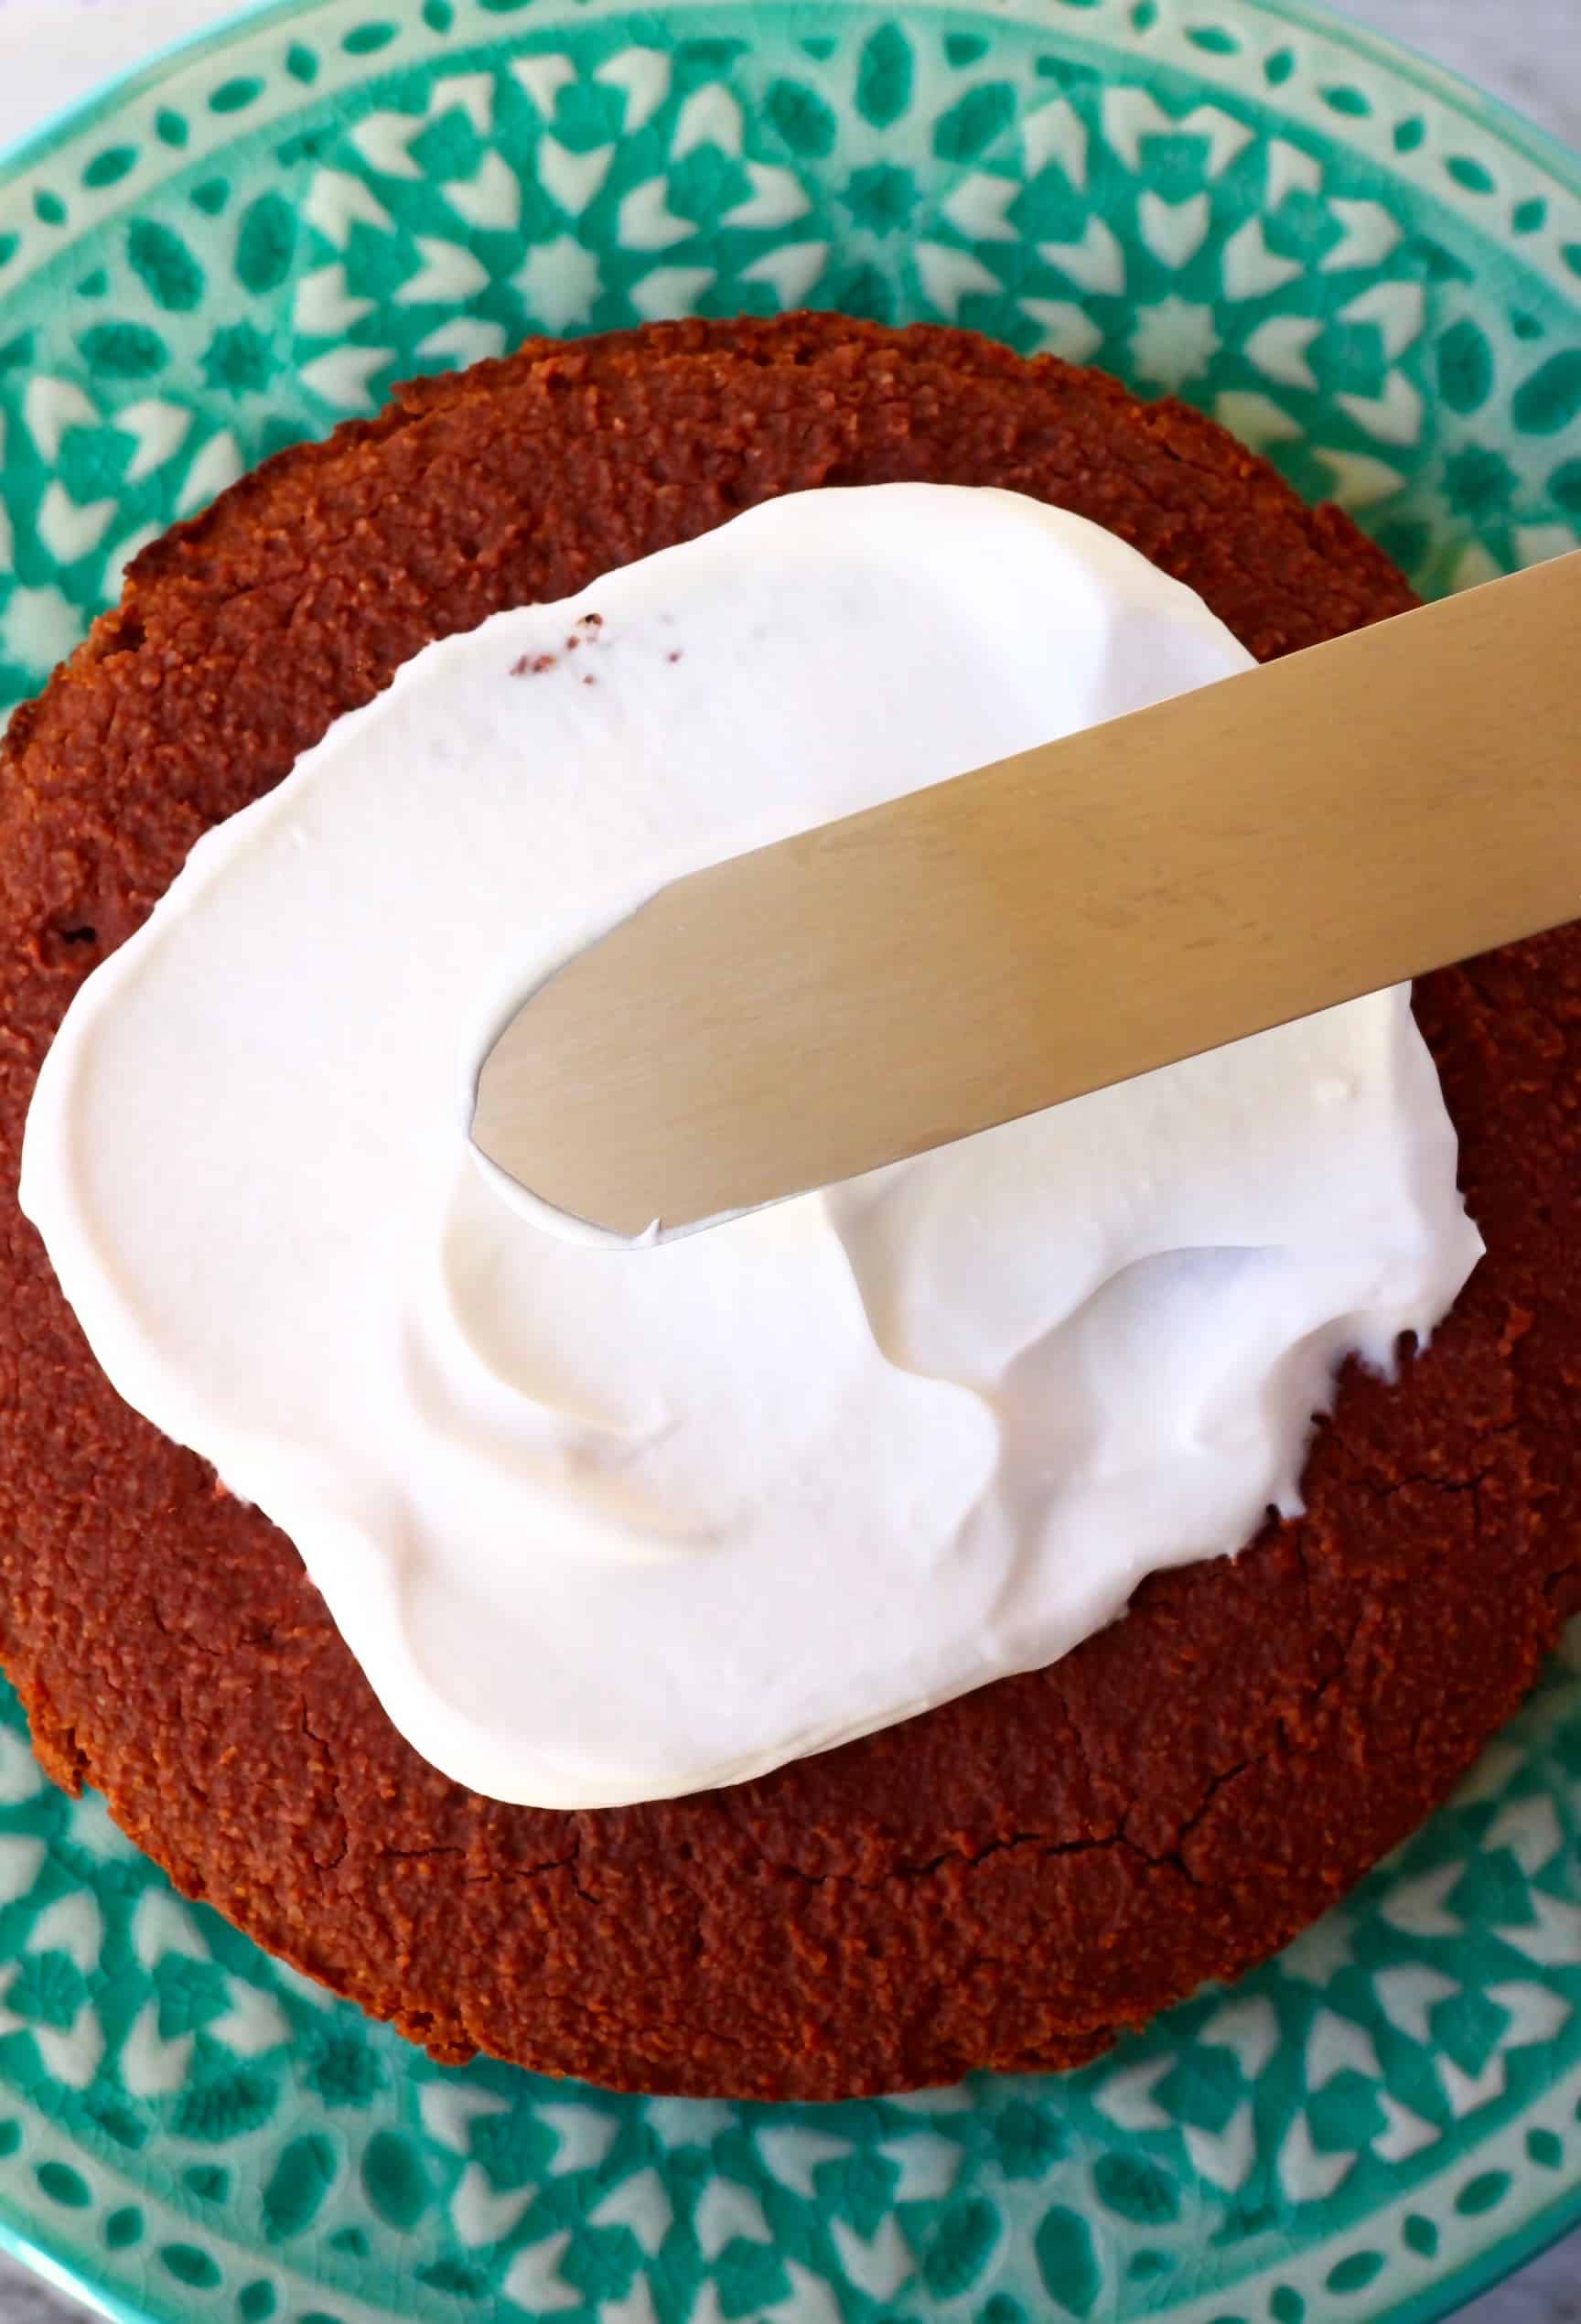 A gluten-free vegan red velvet cake sponge on a cake stand with vegan cream cheese frosting being spread on it with a palette knife